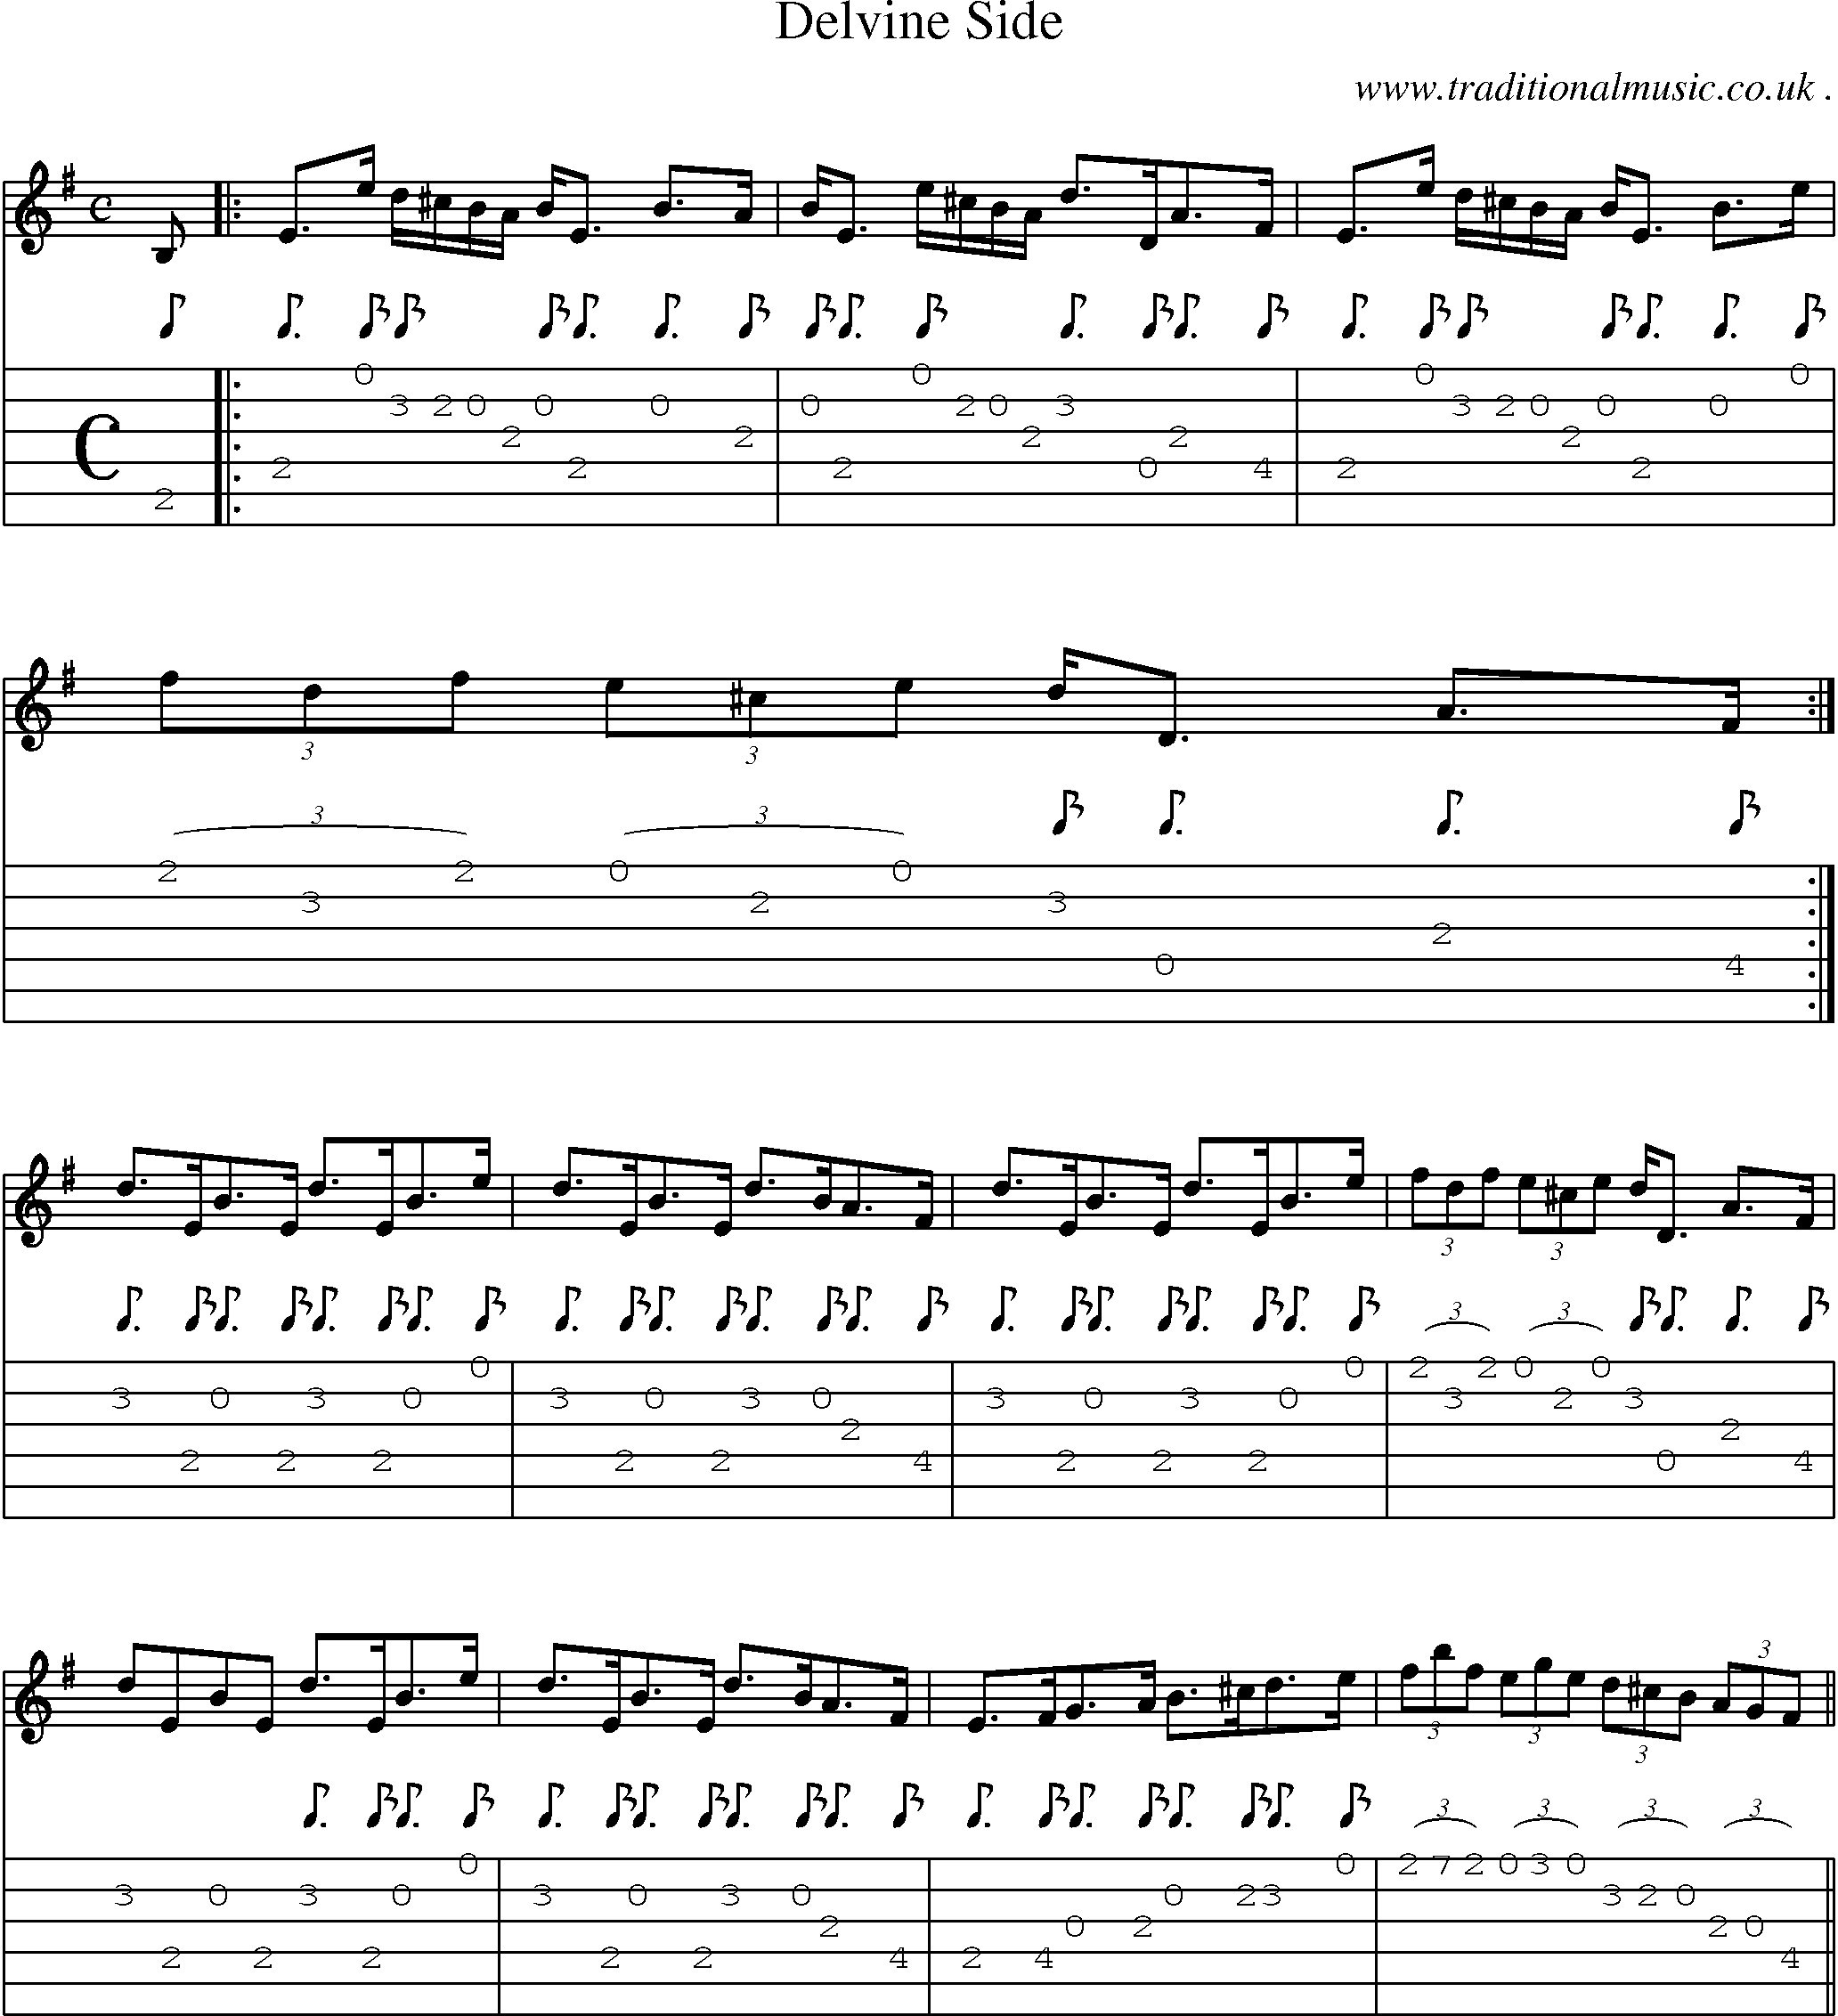 Sheet-music  score, Chords and Guitar Tabs for Delvine Side